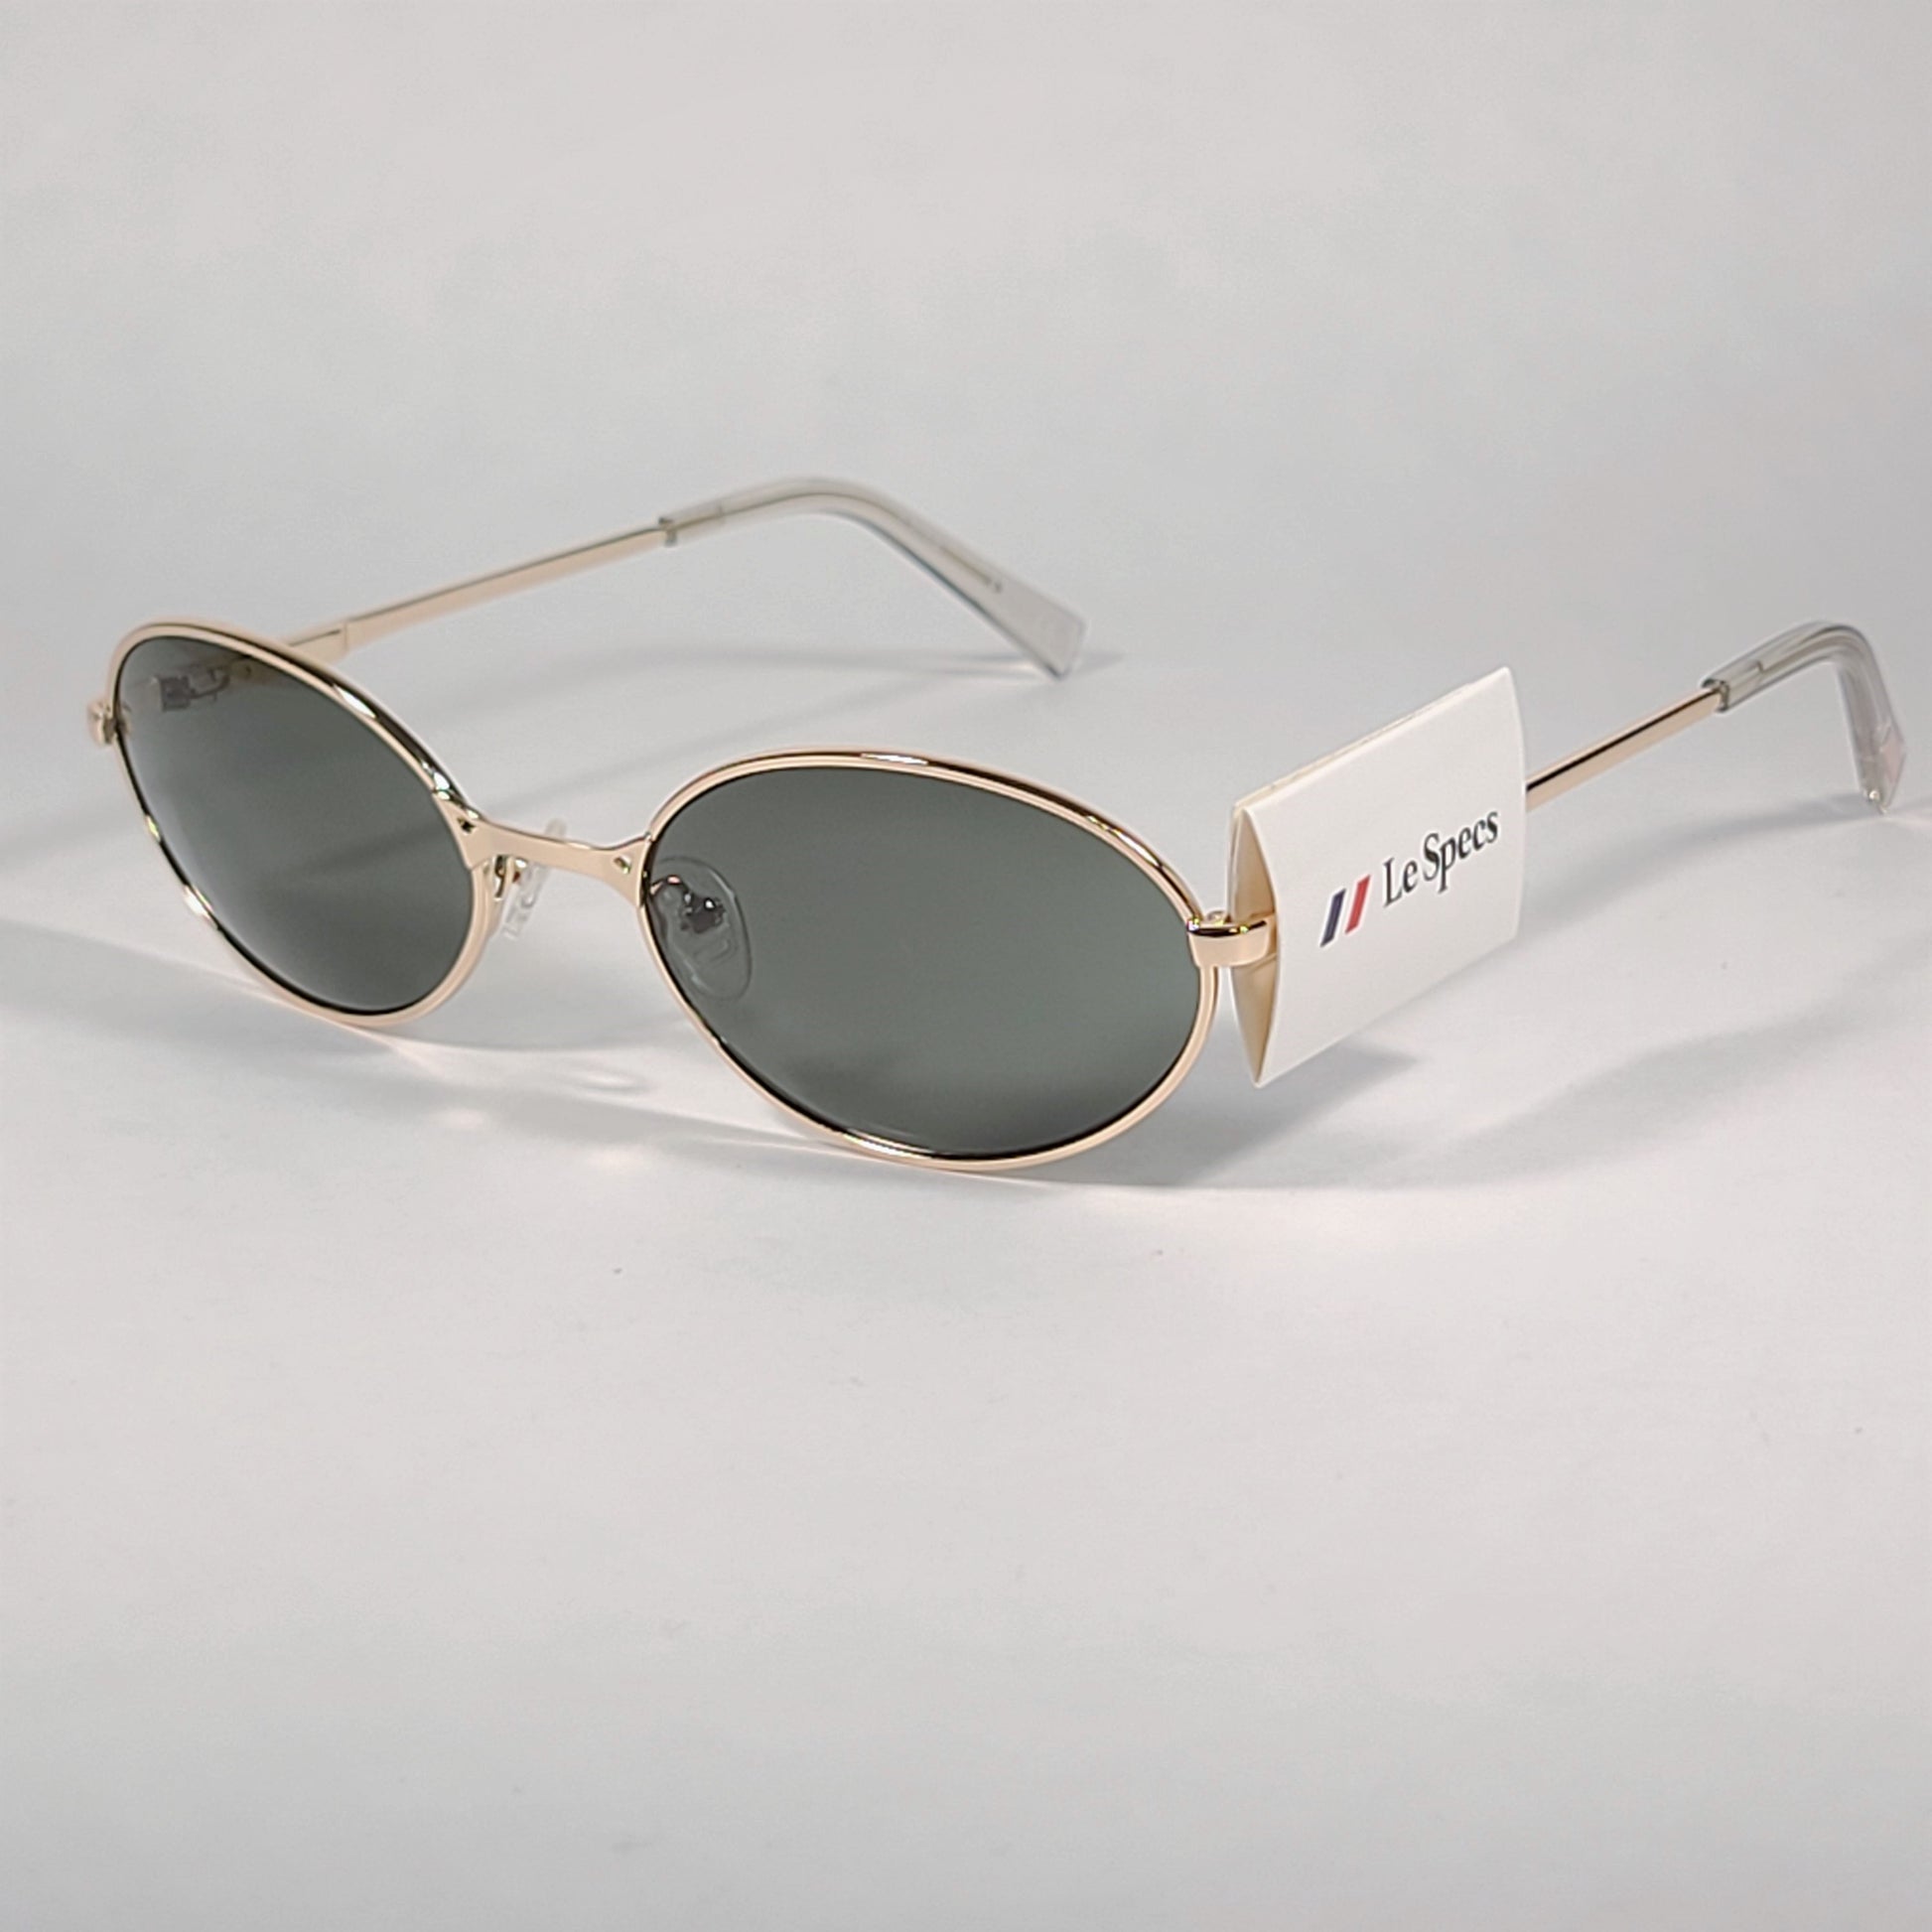 Le Specs Nowhere Flat Oval Sunglasses Gold Frame Gray Green Mono Lens LSP1902070 GOLD - Sunglasses